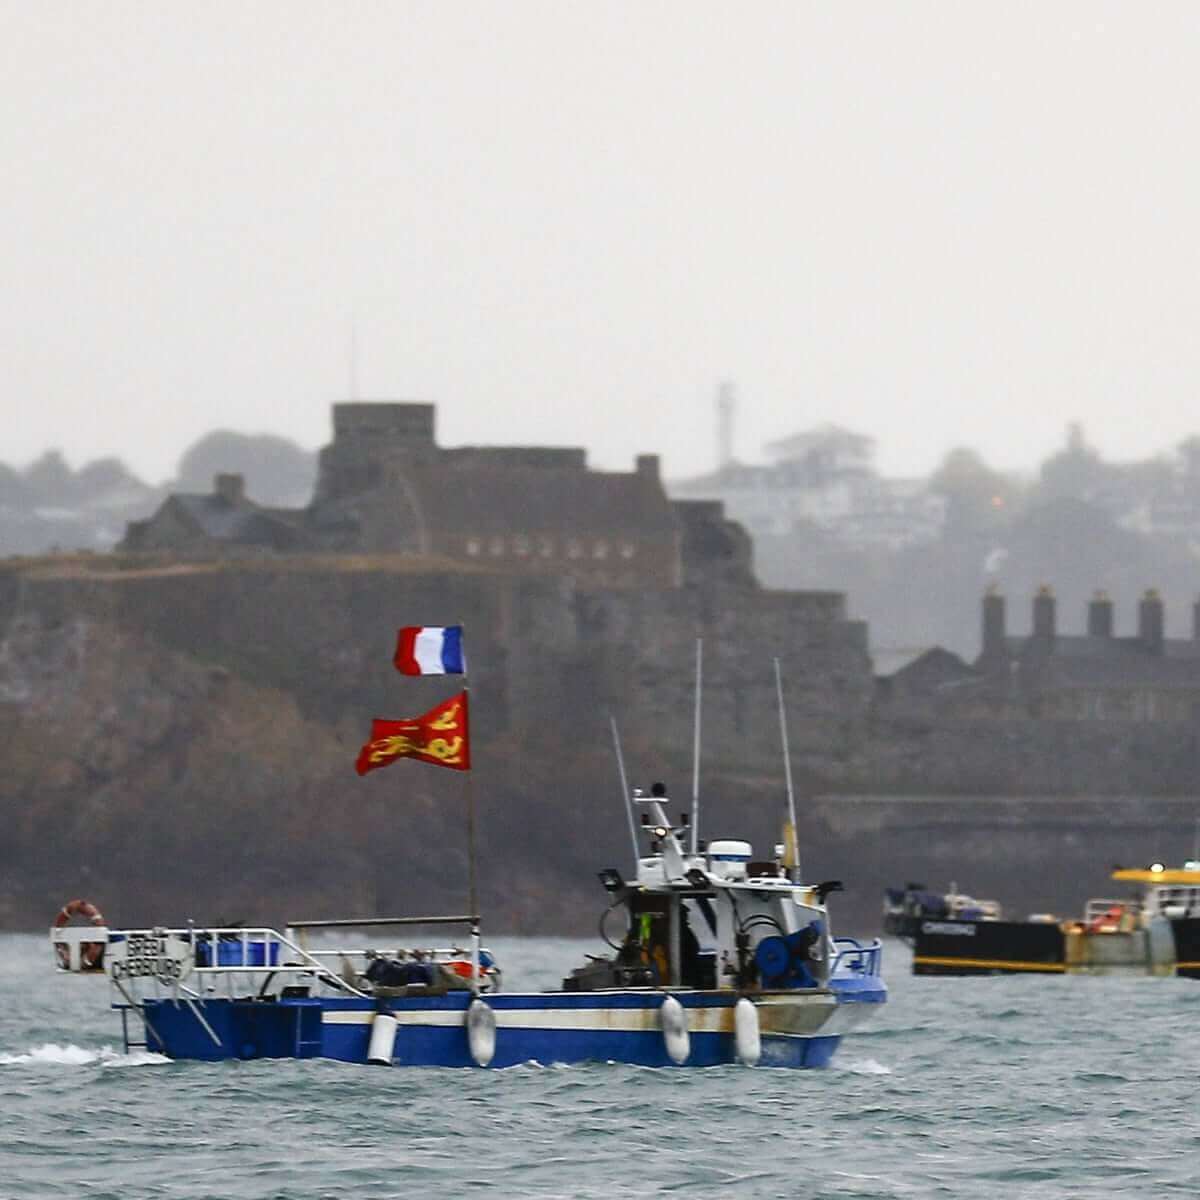 France Irked by UK, Jersey’s Refusal to Grant Fishing Licenses